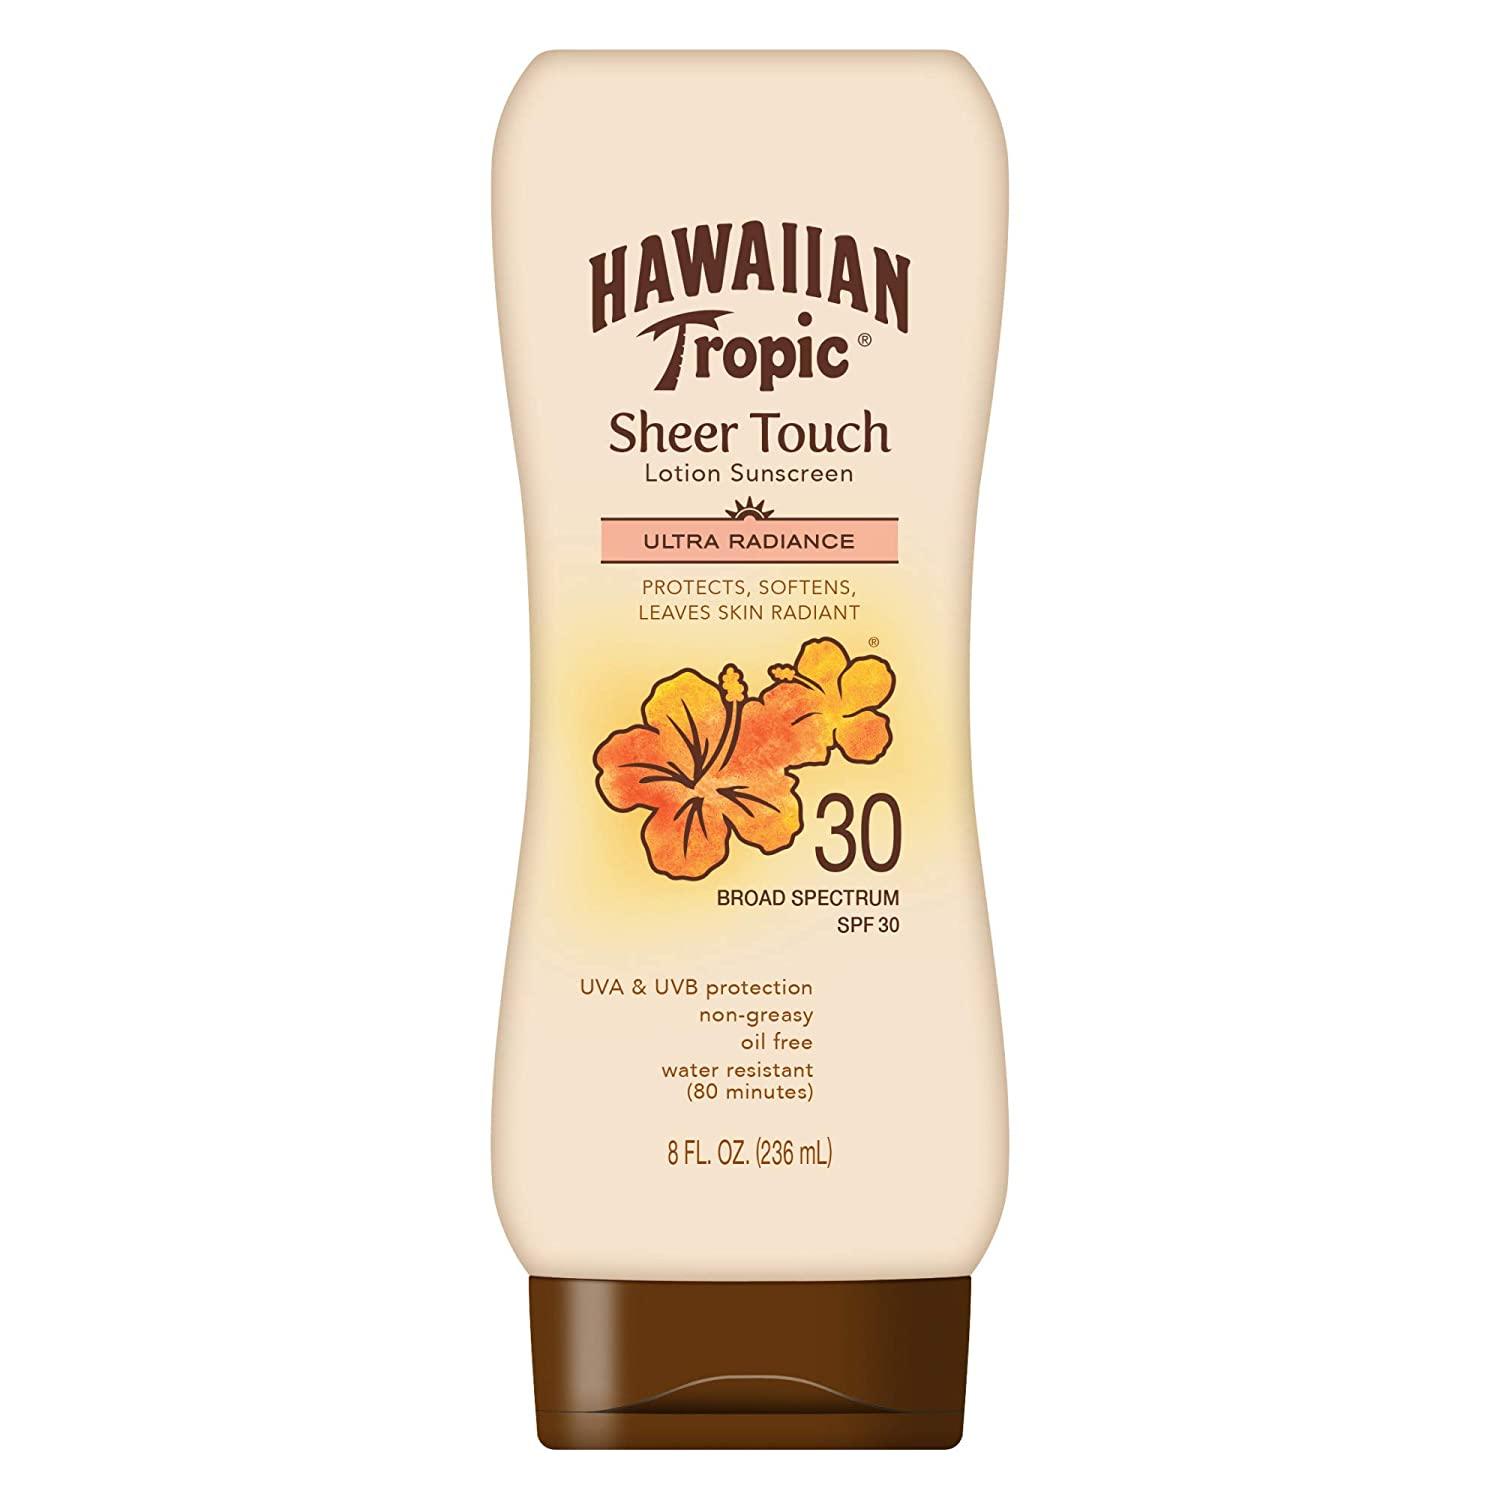 Sheer Touch Lotion Sunscreen Broad Spectrum SPF 30